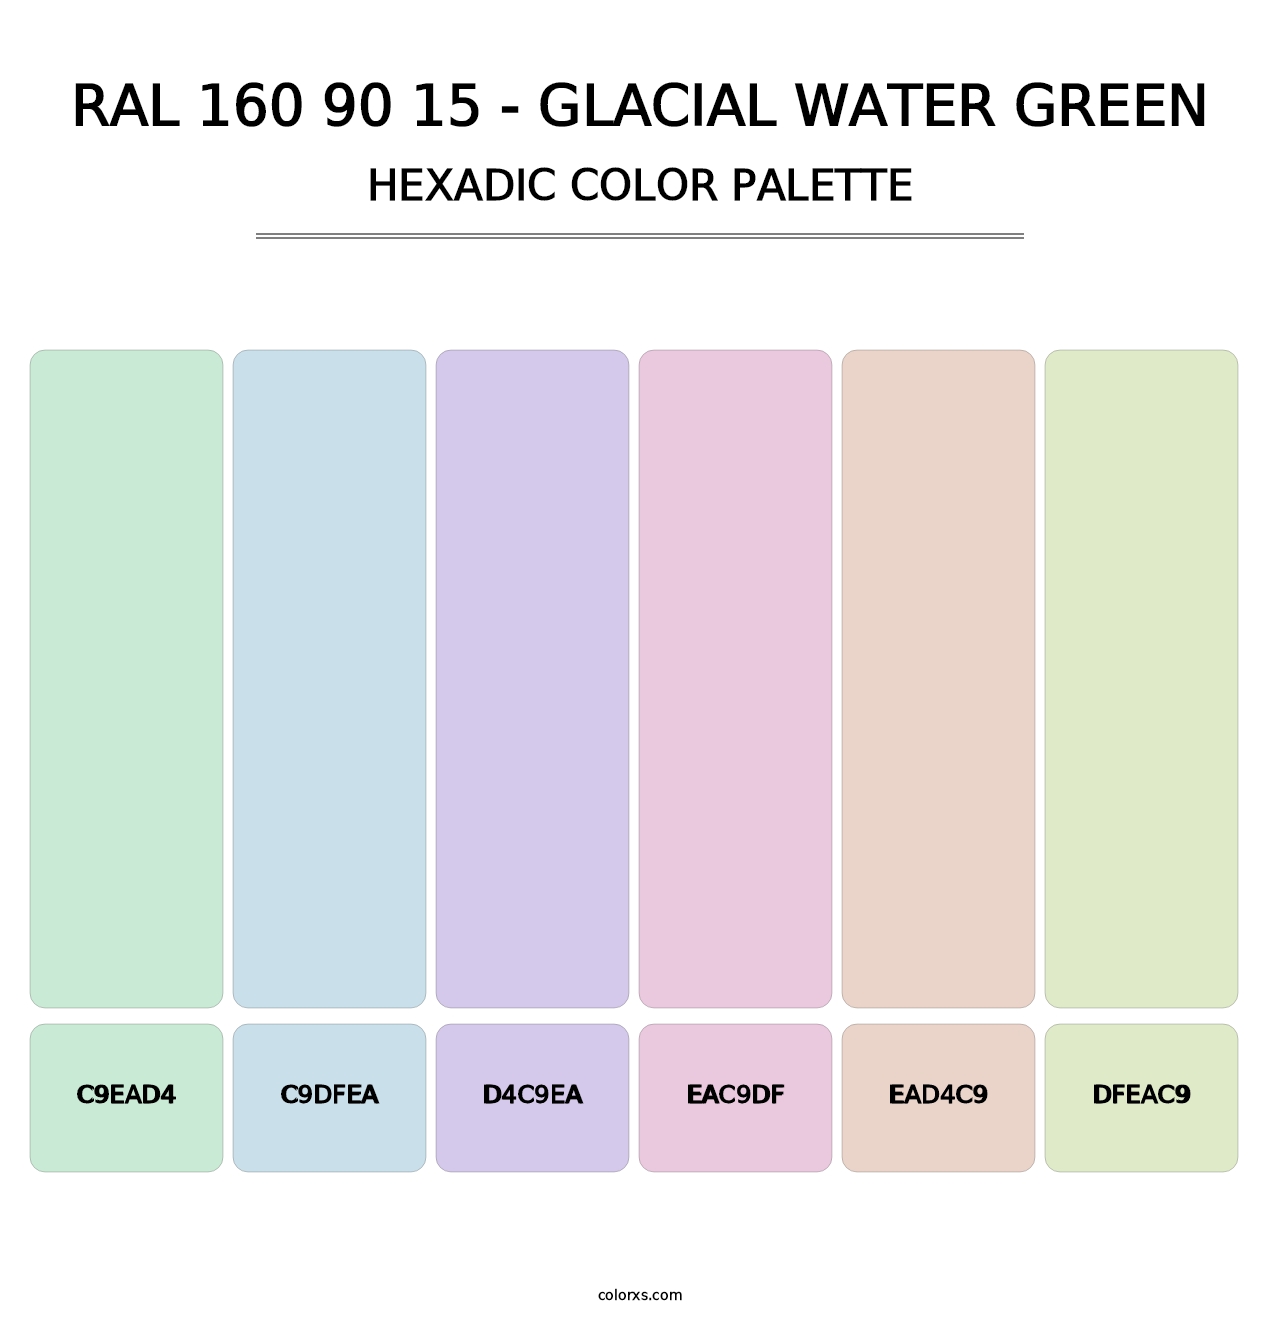 RAL 160 90 15 - Glacial Water Green - Hexadic Color Palette